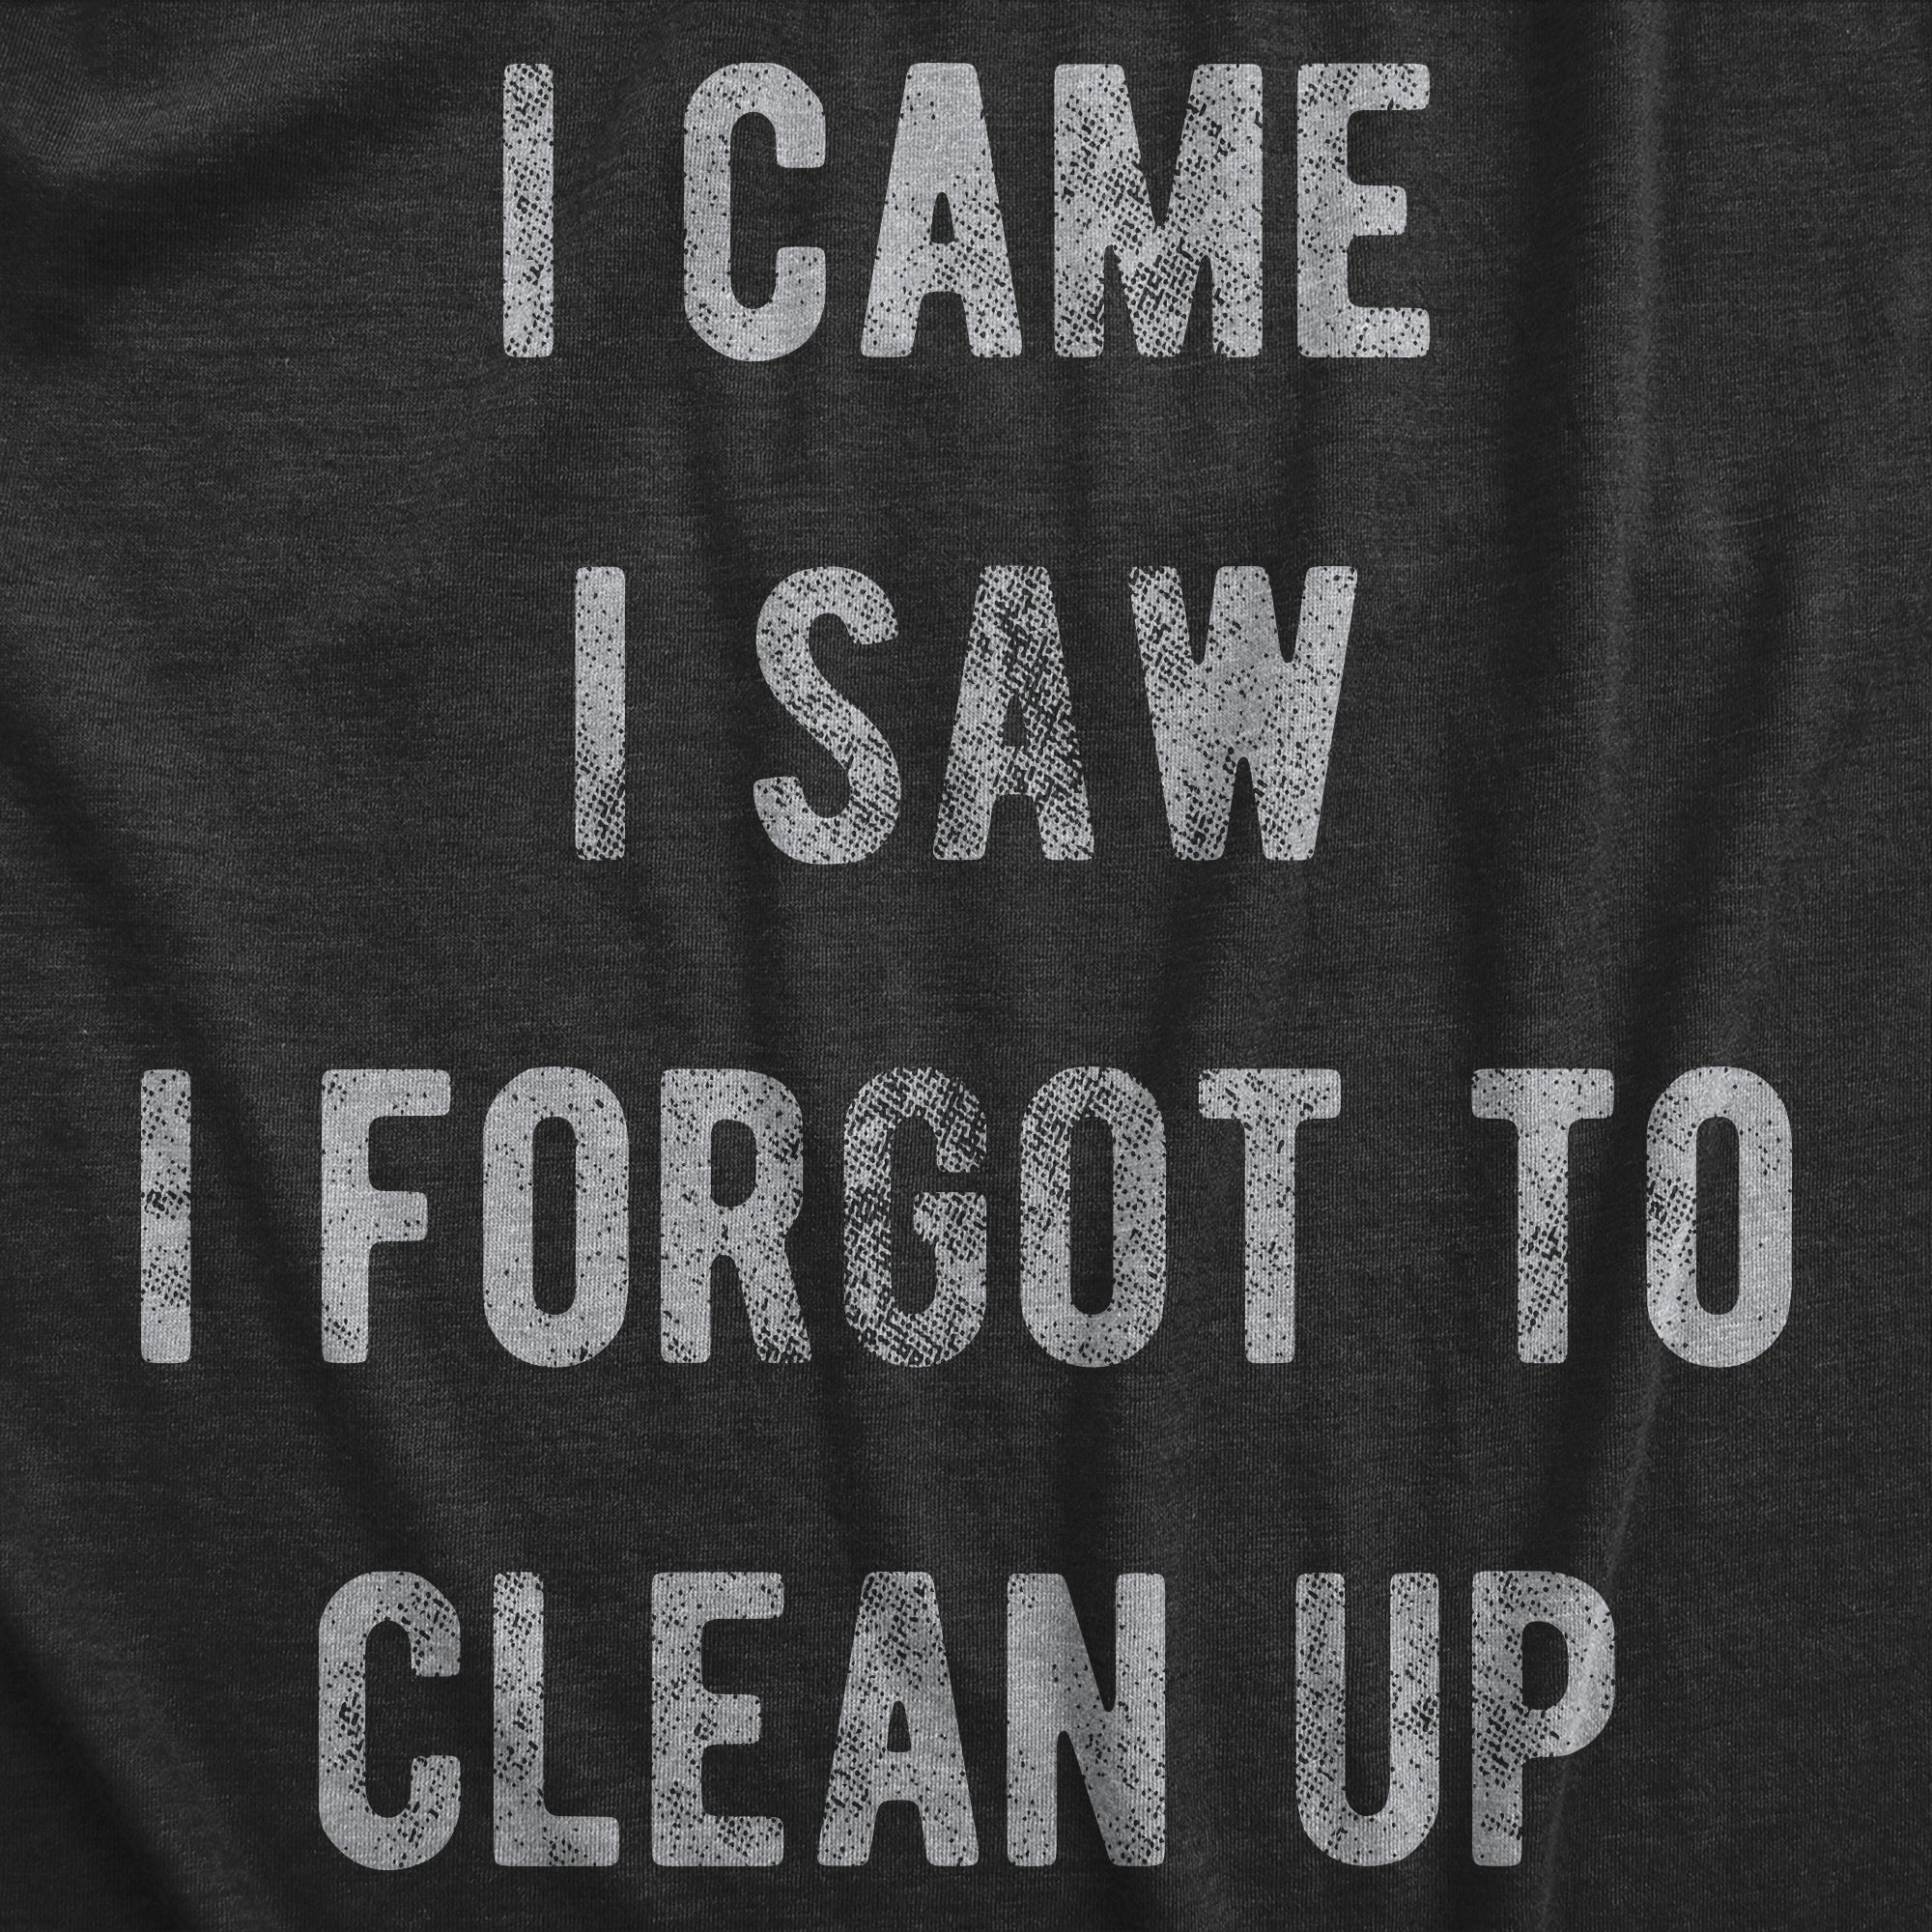 Funny Heather Black - CLEAN I Came I Saw I Forgot To Clean Up Mens T Shirt Nerdy Sarcastic Tee